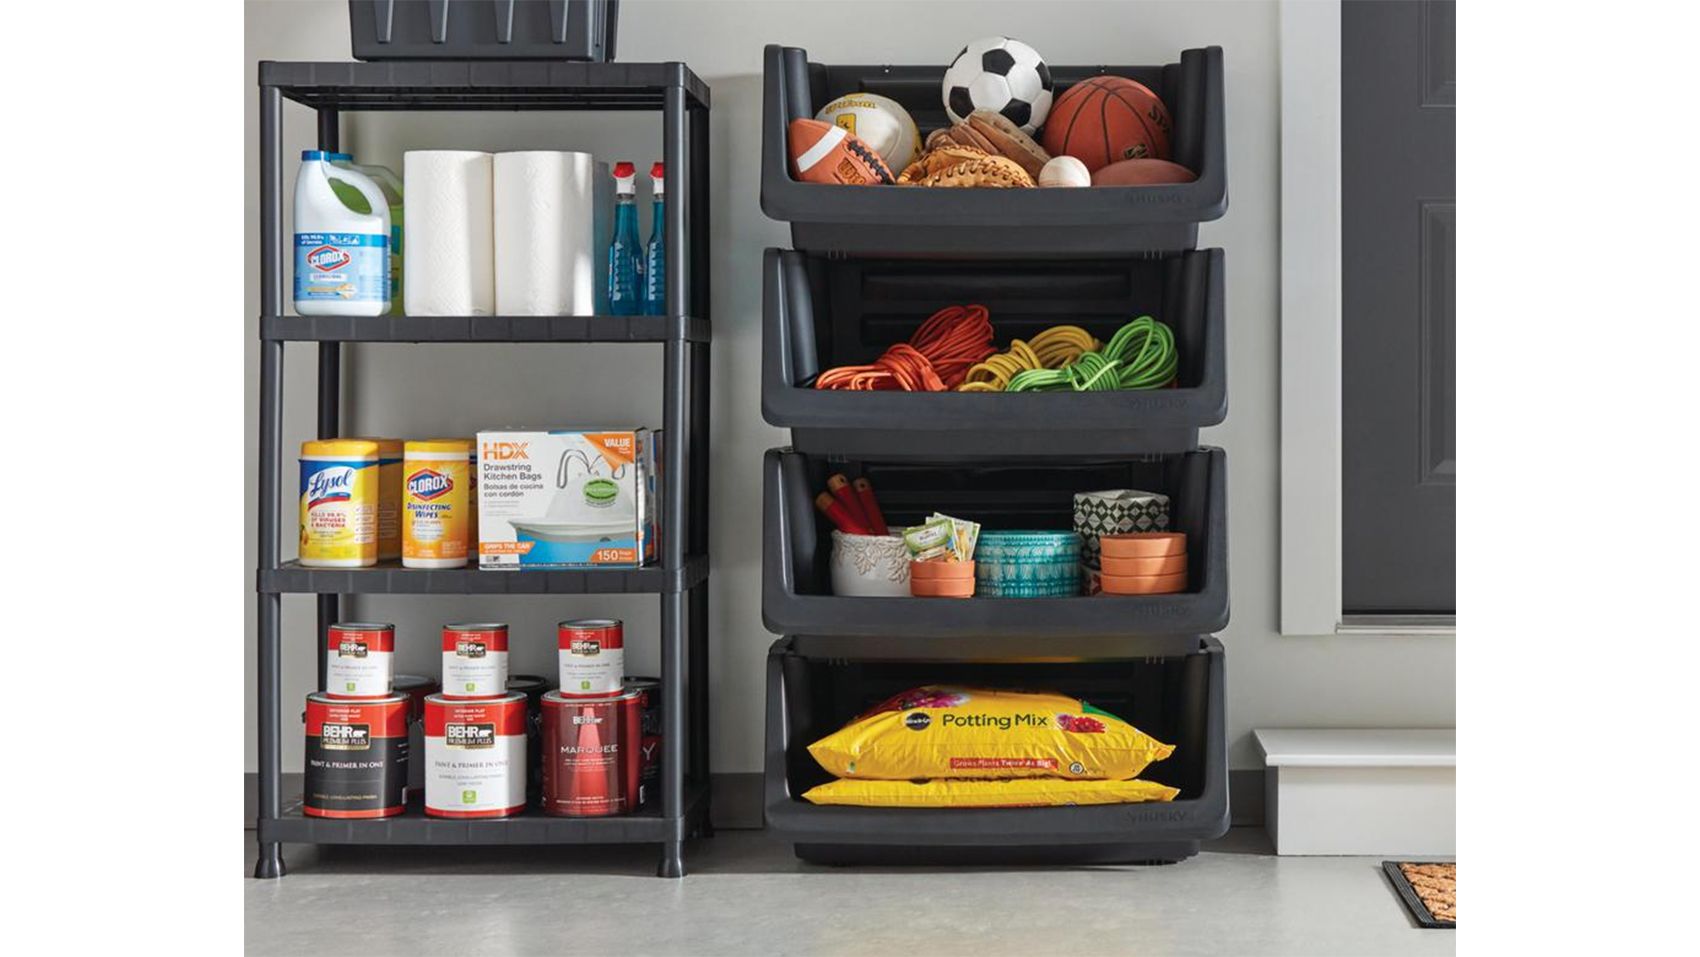 Why You Should Avoid Storage Containers When Organizing - Balagan